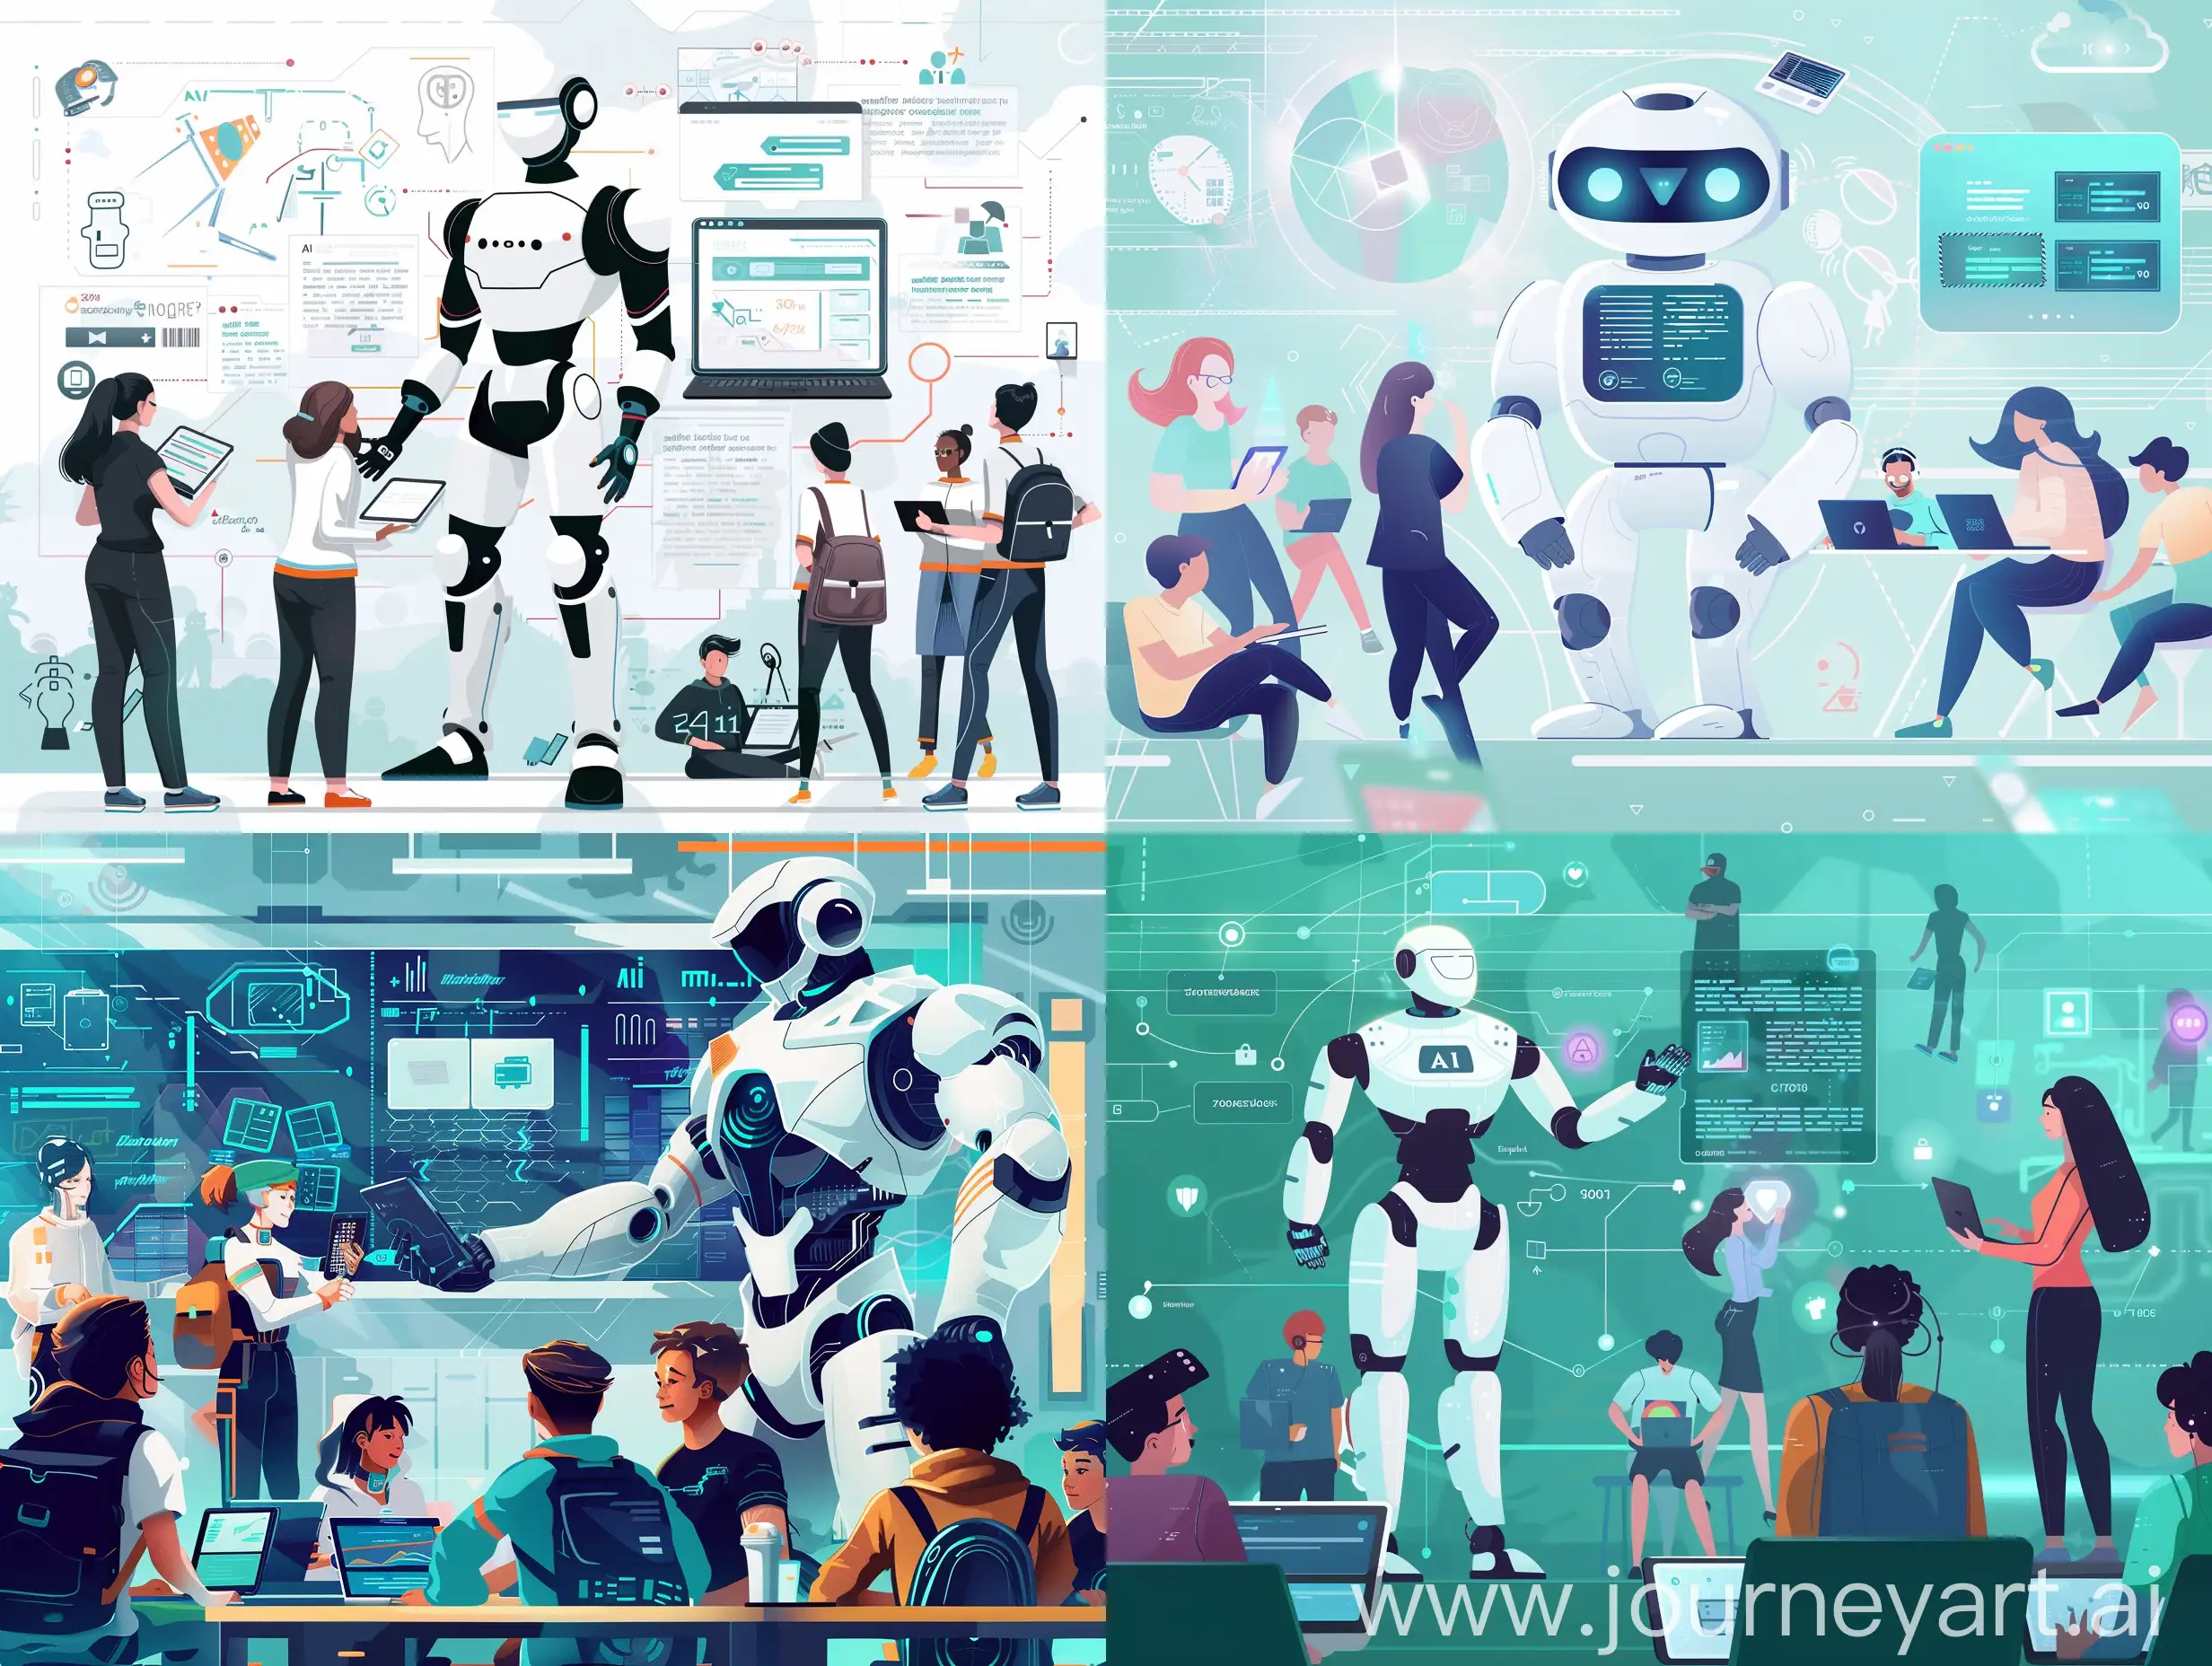 Futuristic-AI-Assistant-Engages-Diverse-Students-in-Interactive-Learning